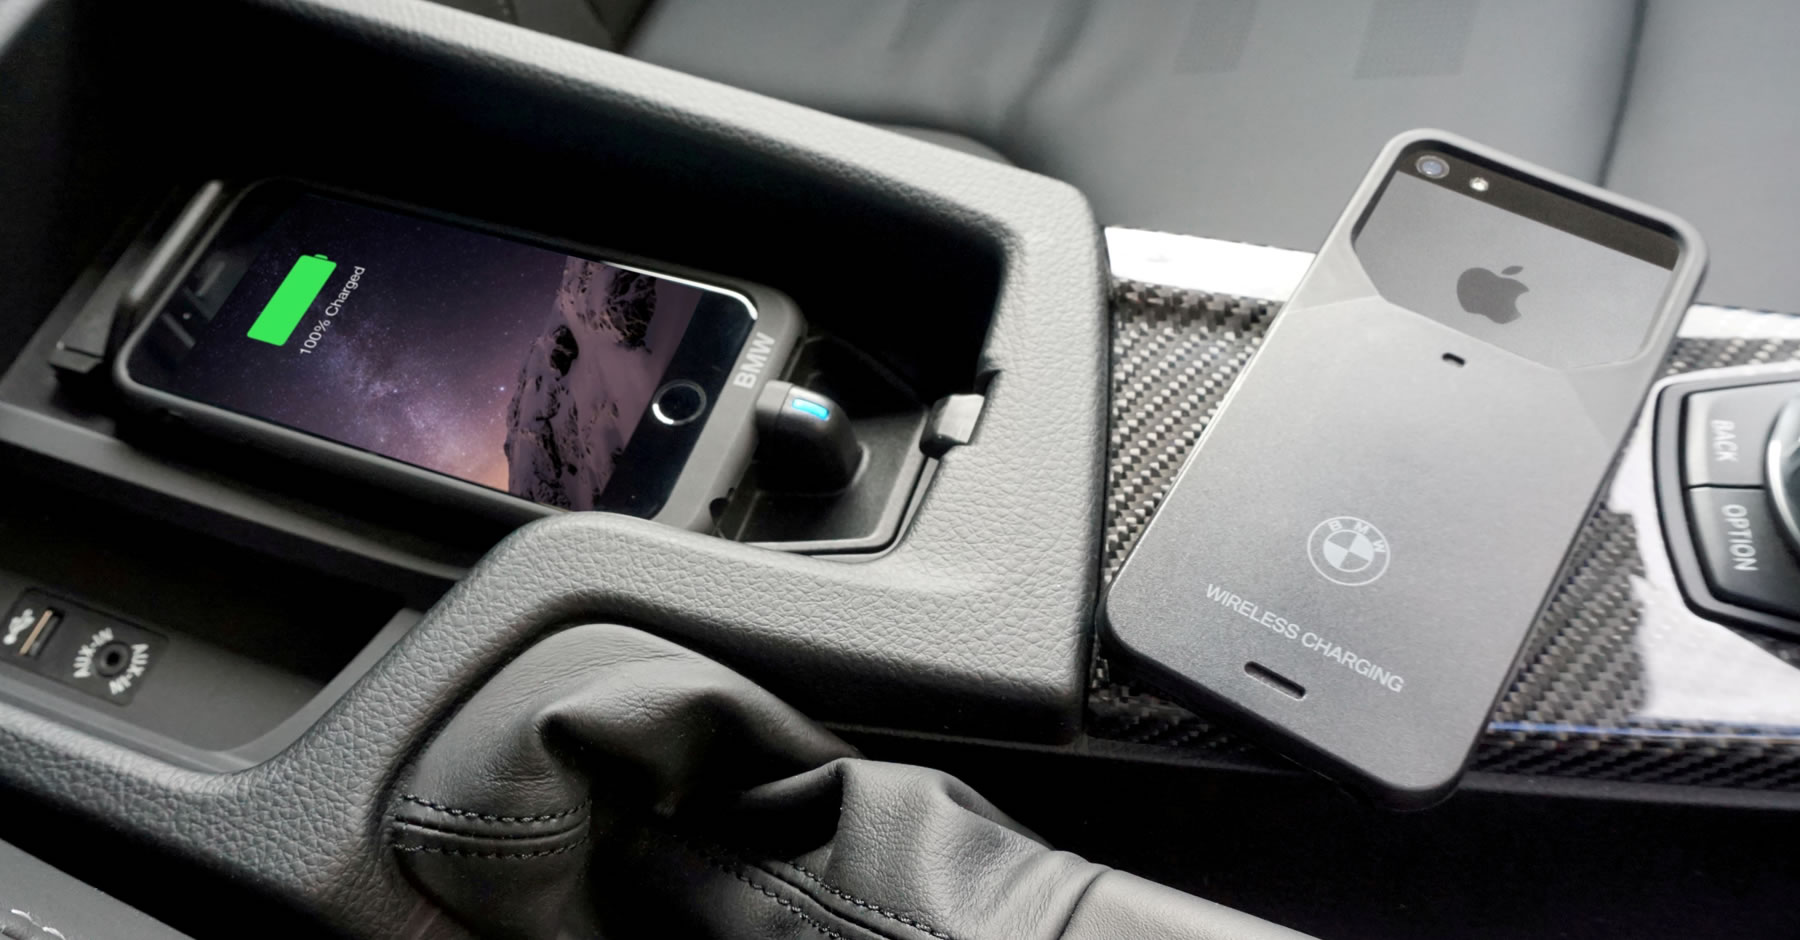 Lexus wireless charging - Aircharge